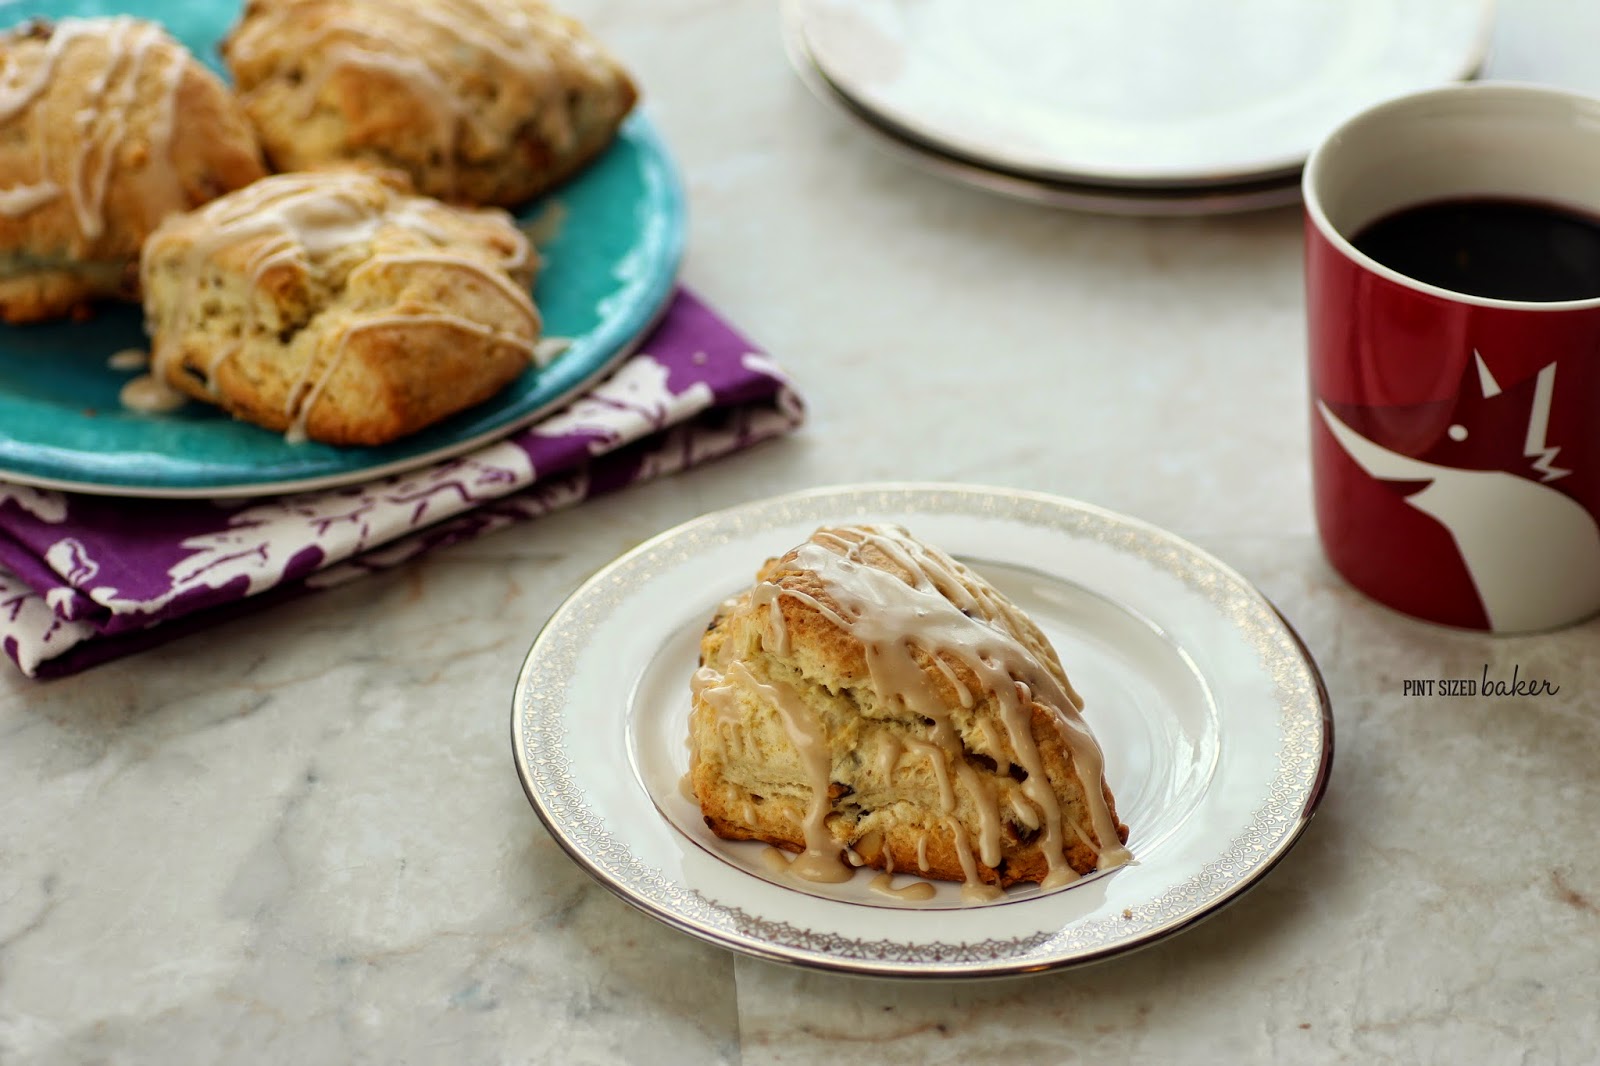 My family loves these Light and Fluffy Maple Pecan Scones! Homemade an ready to eat in under an hour!